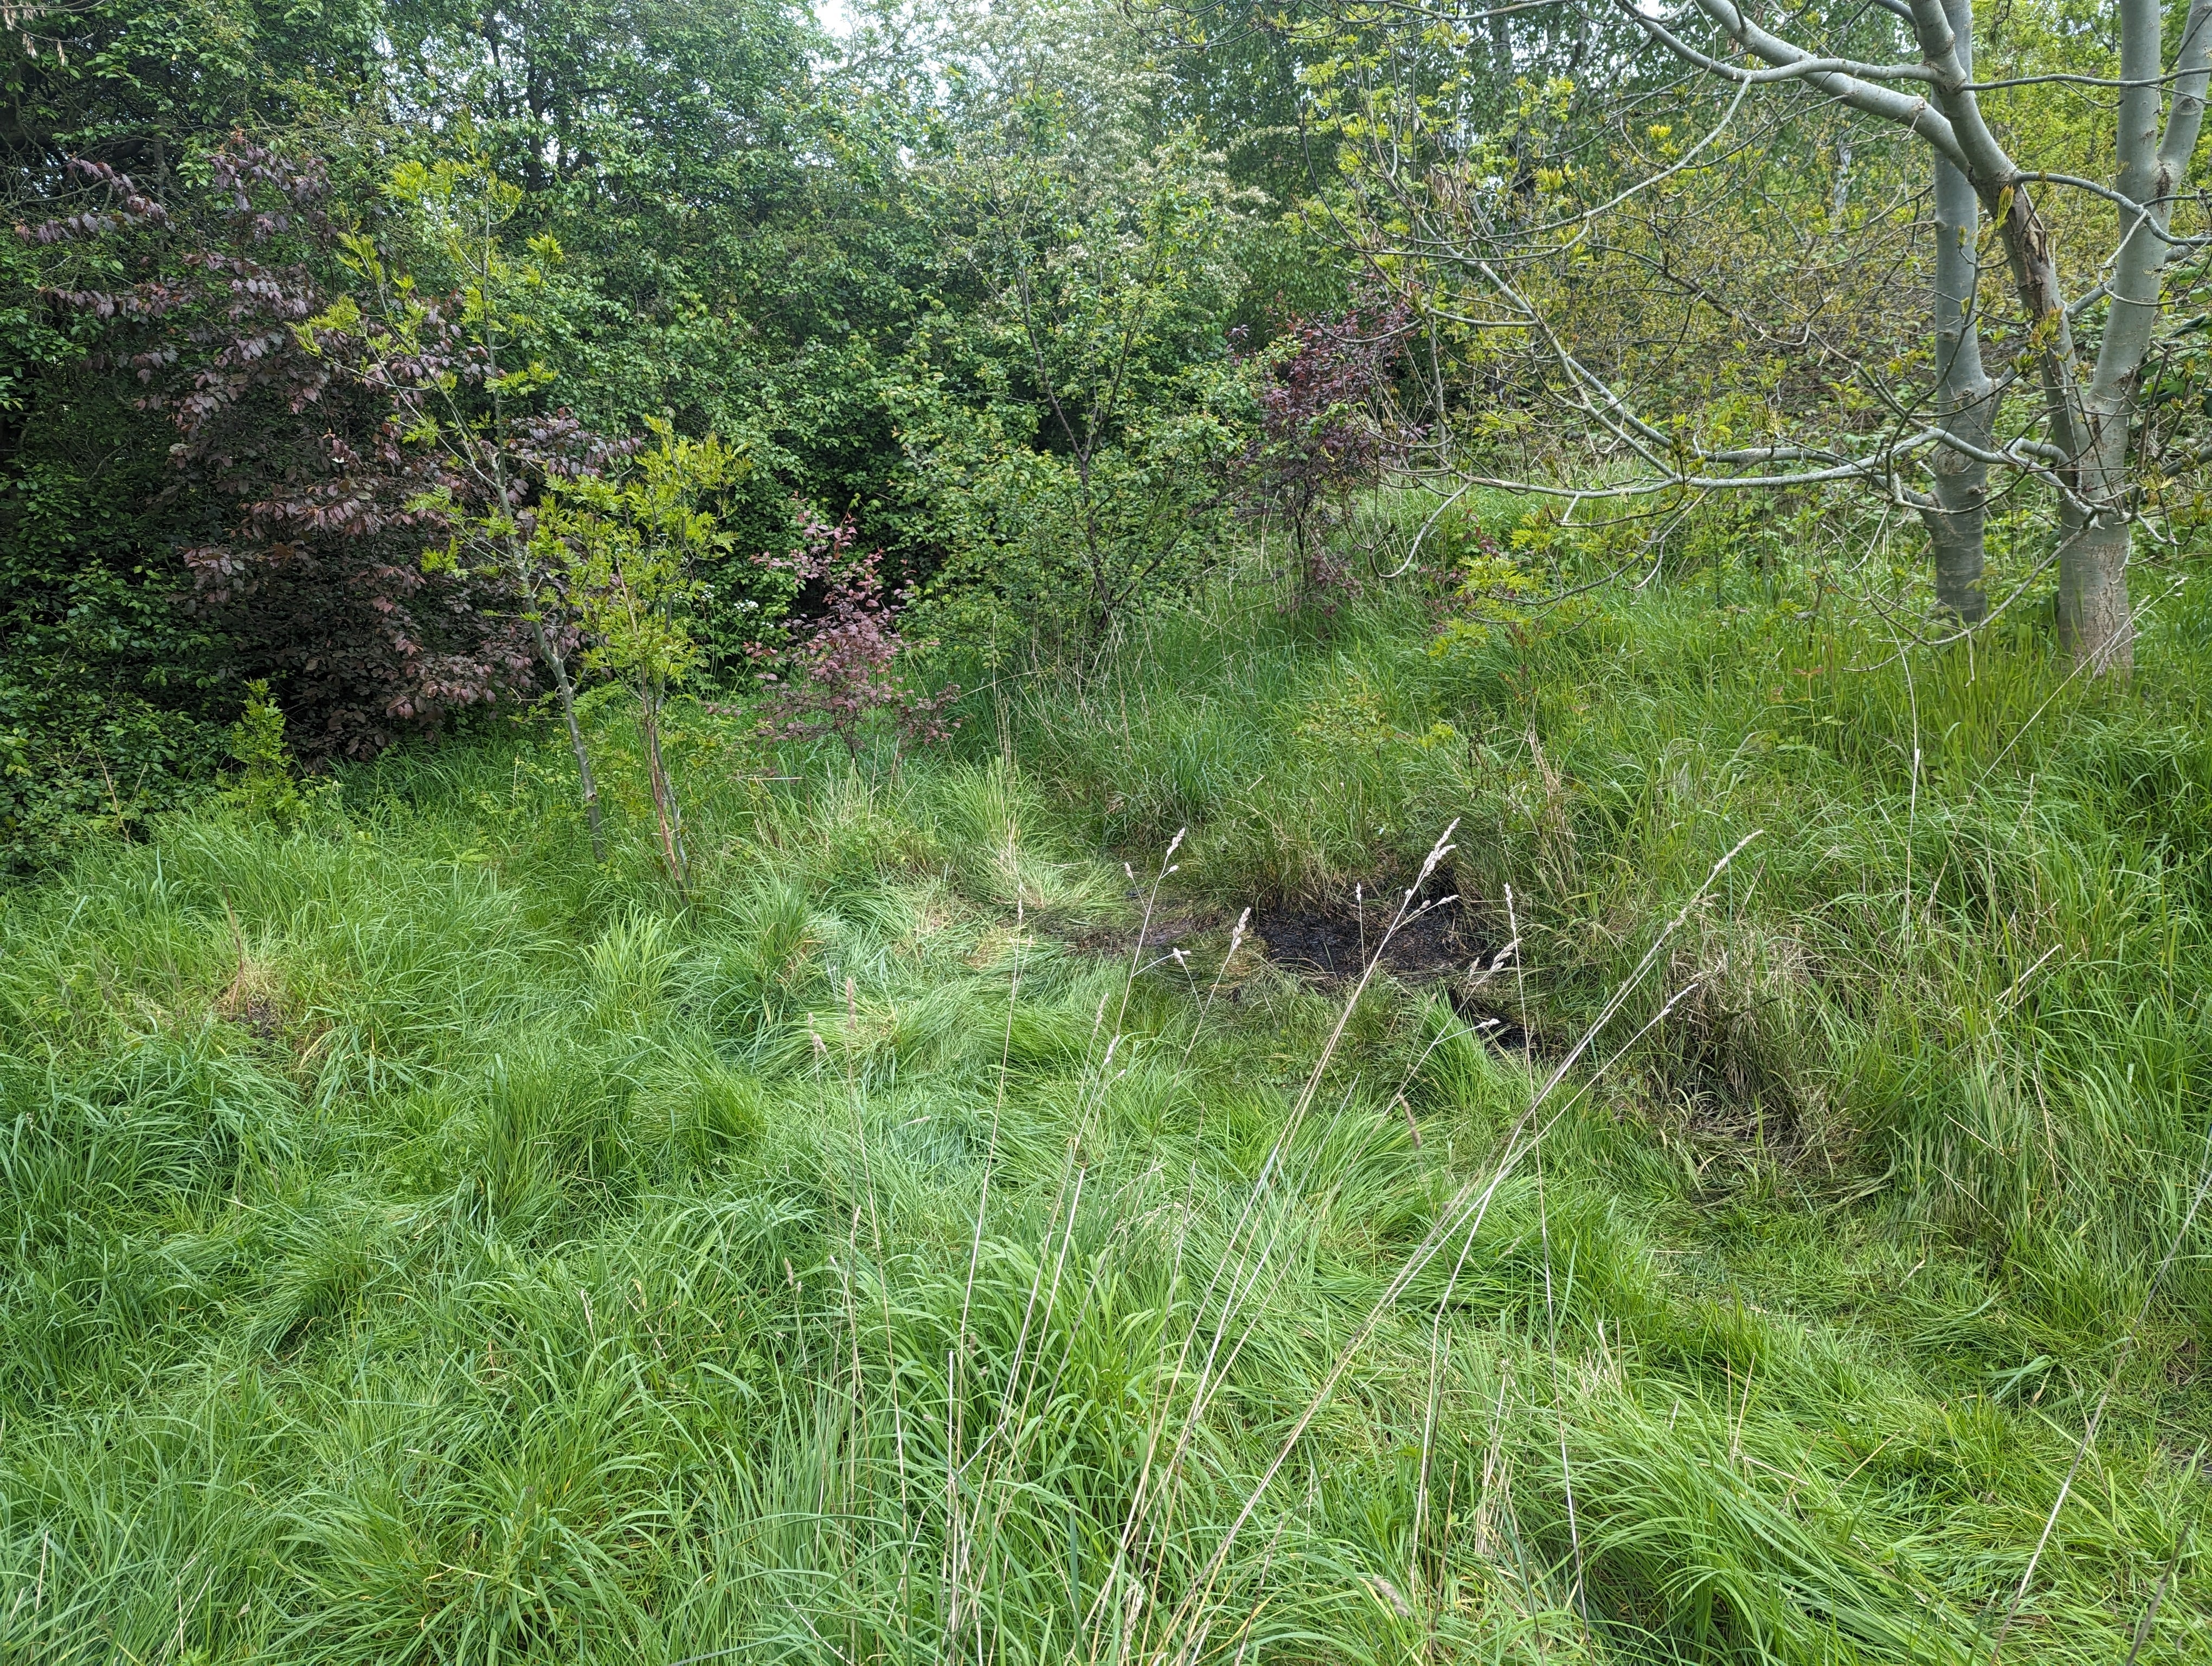 Burnt grass where the mutilated bully dog was discovered in north London